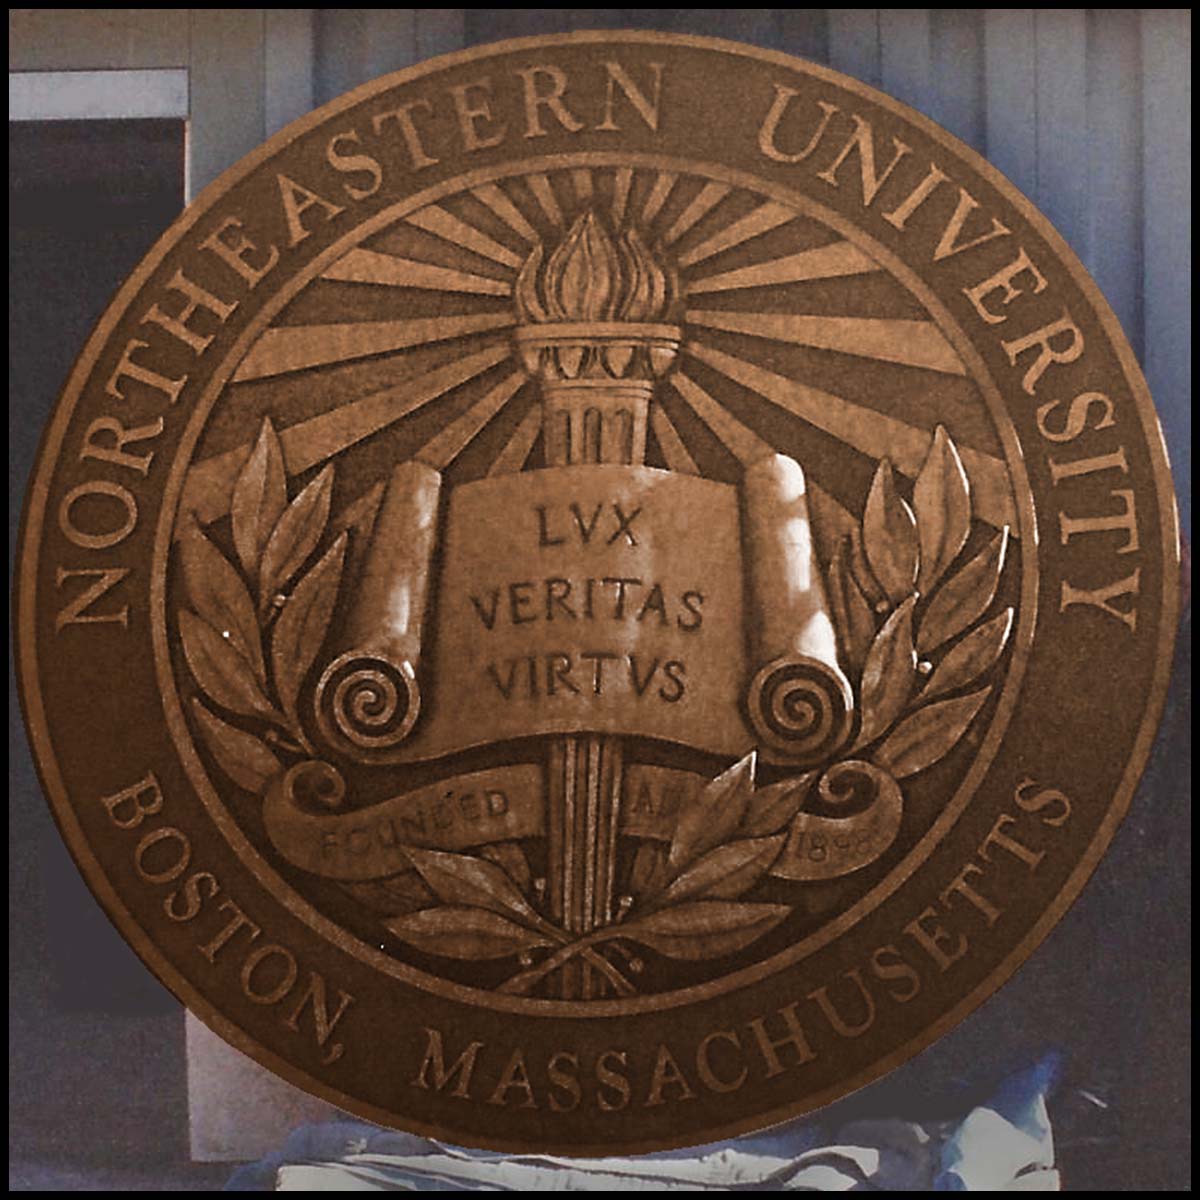 photo of bronze relief sculpture of Northeastern University's seal leaning up against wall